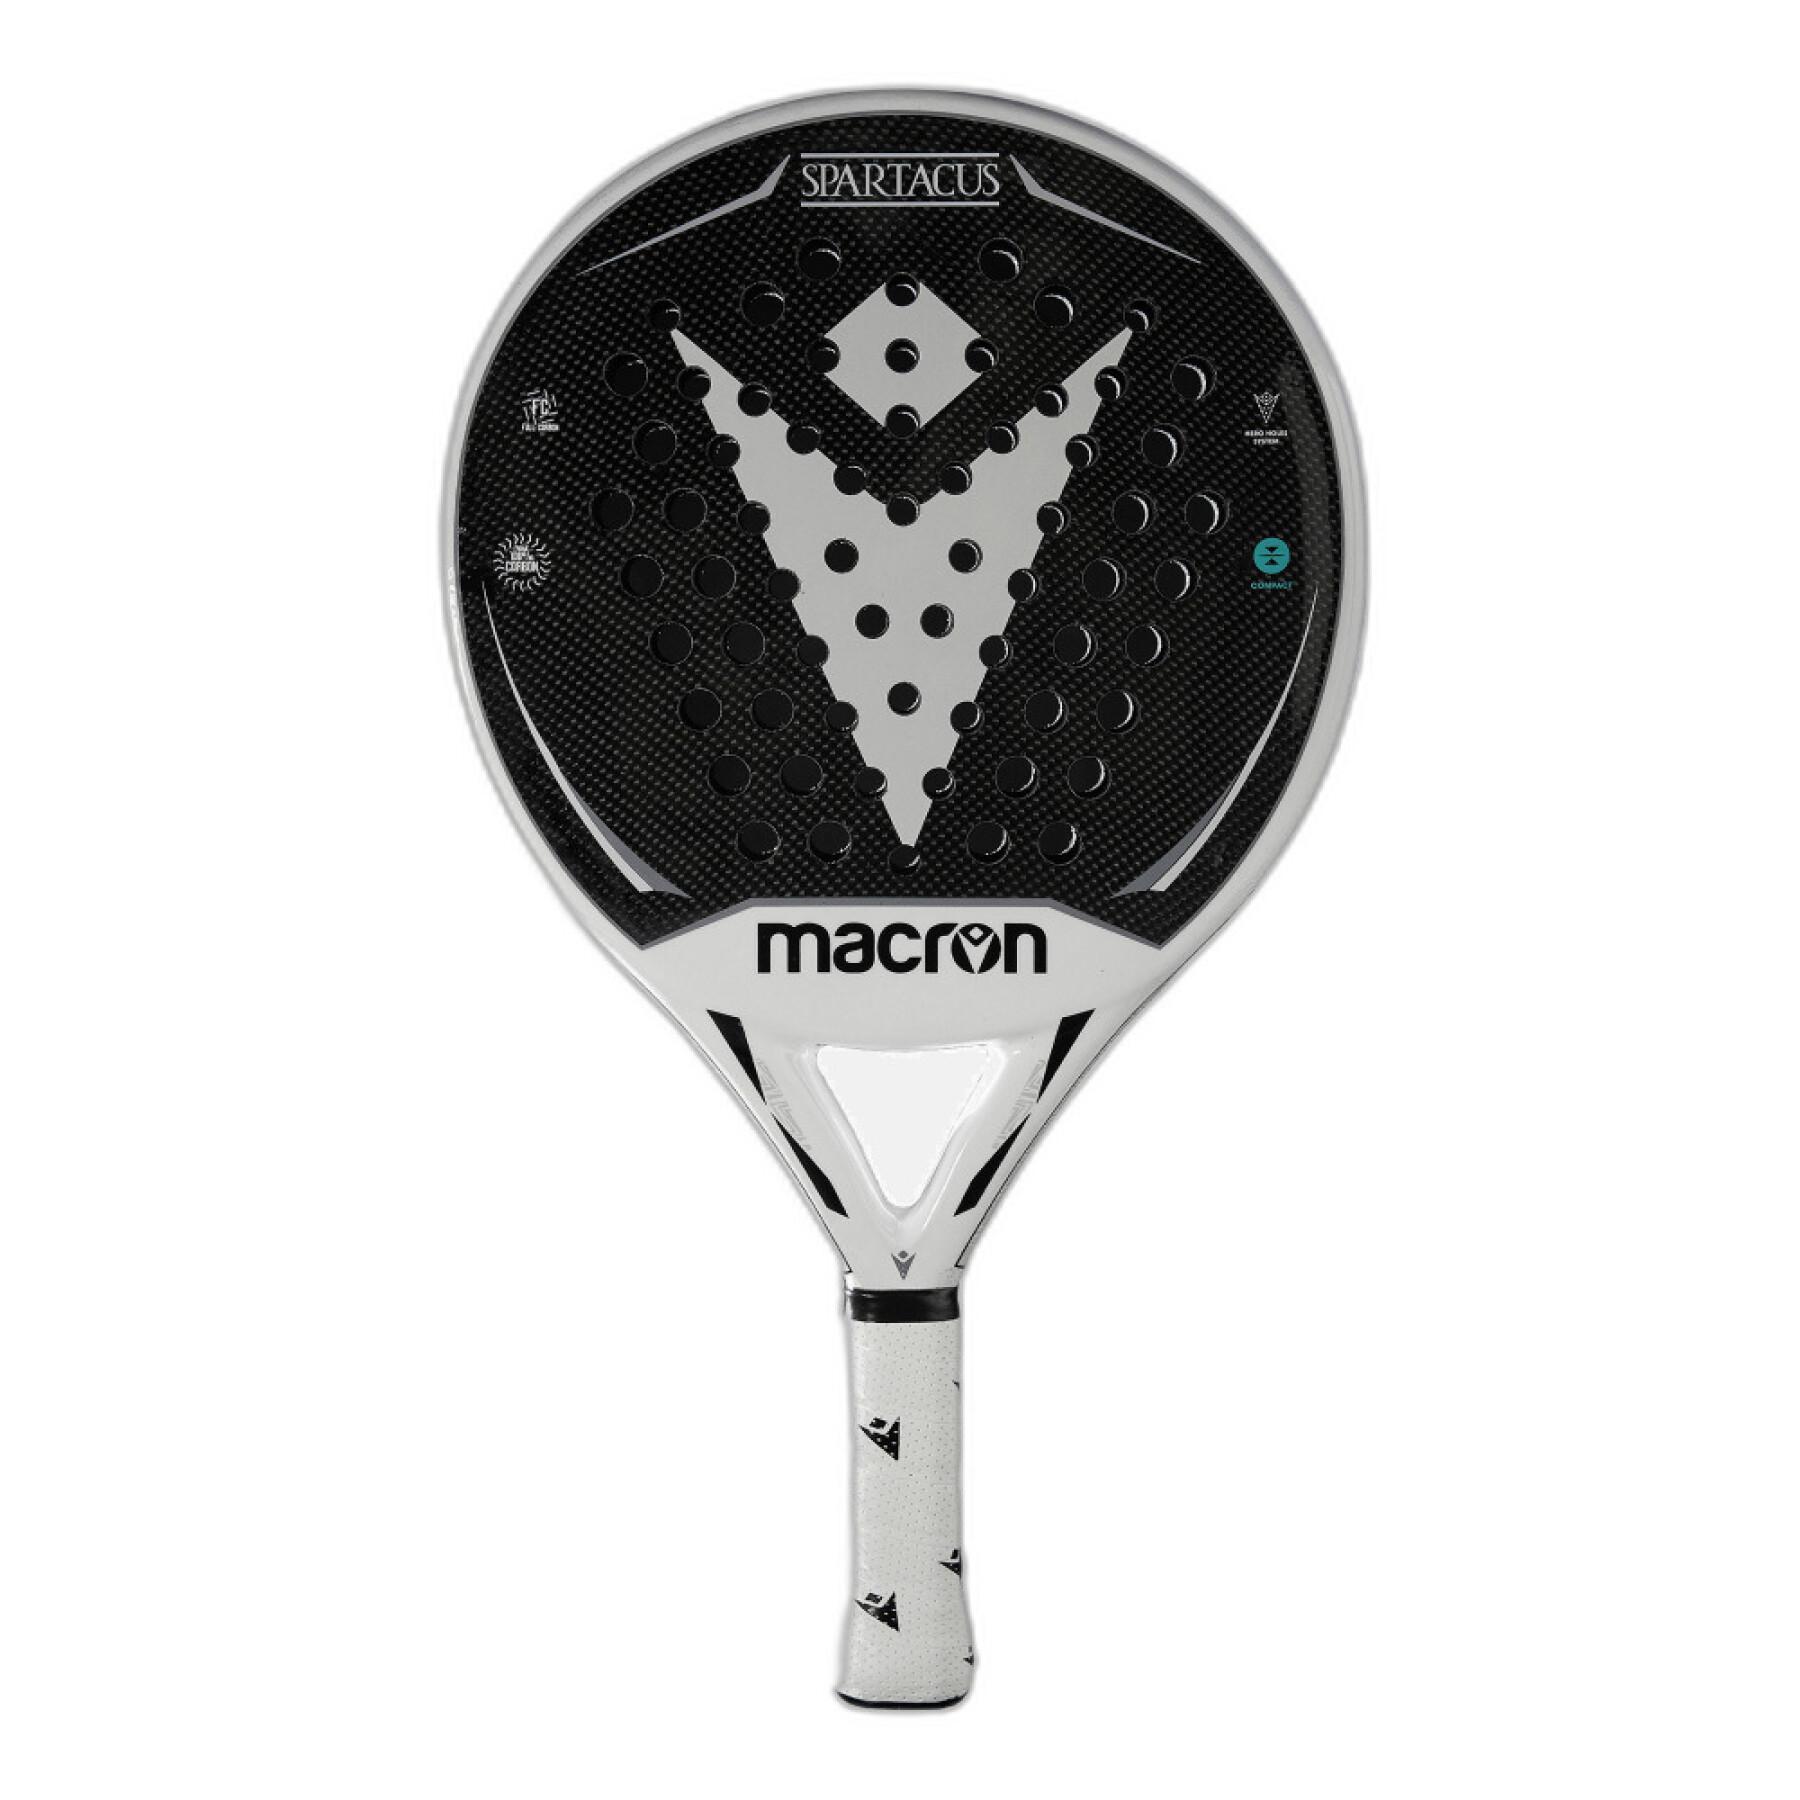 Paddle tennis racket Macron Spartacus Frequency